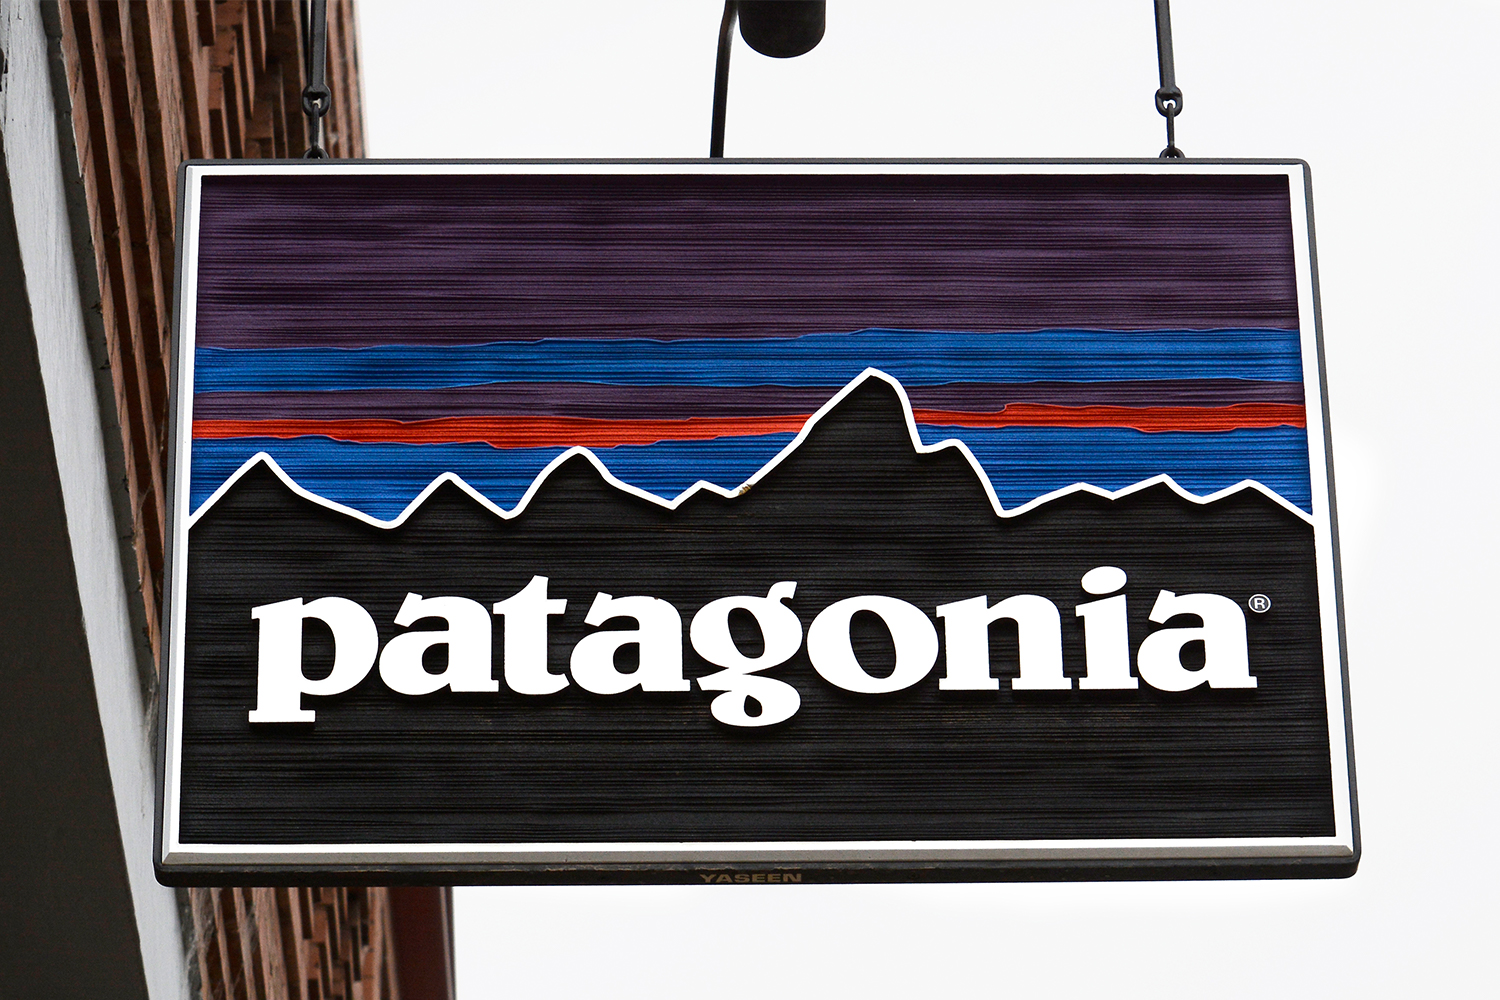 A shop sign for outdoor brand Patagonia in Telluride, Colorado